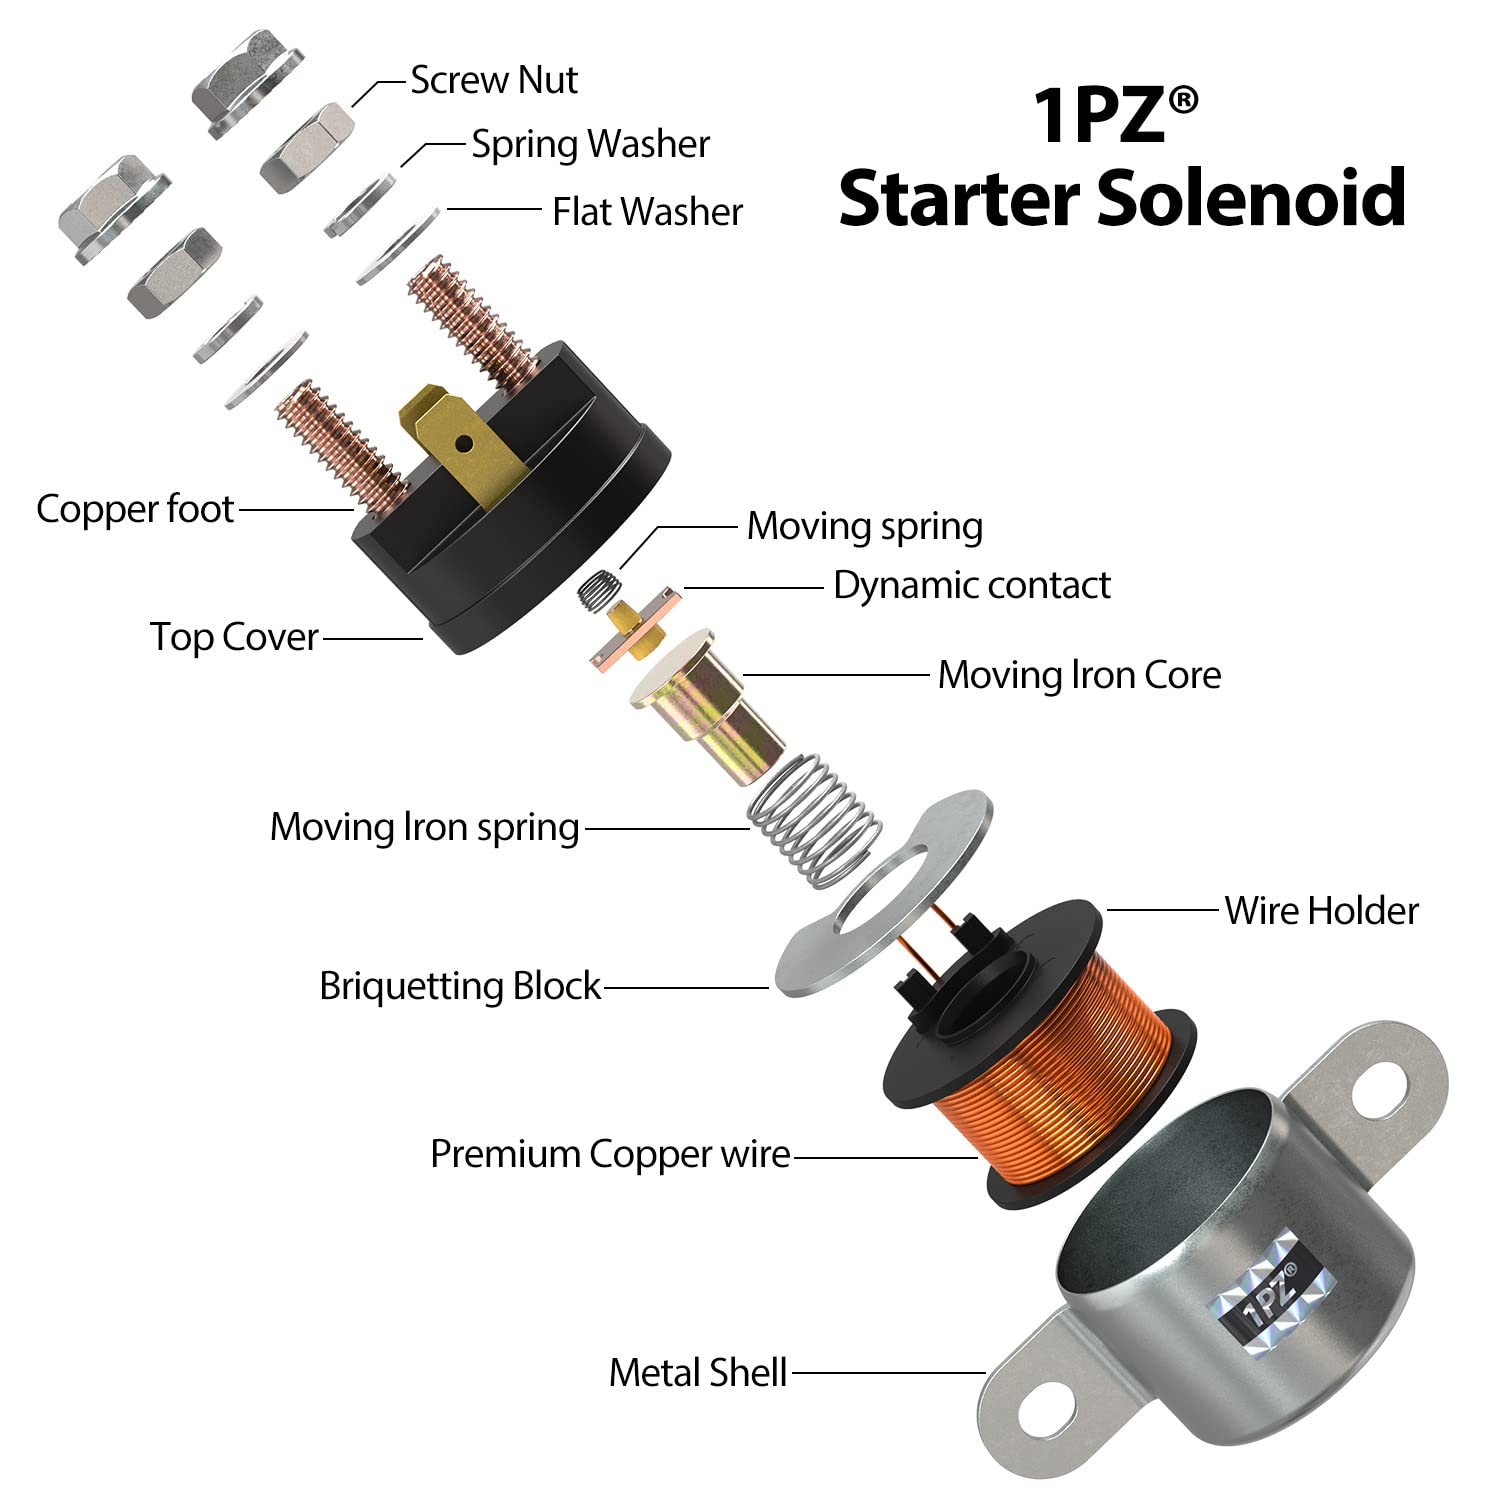 1PZ Starter Solenoid Relay Replacement for Can Am Bombardier Outlander Renegade 400 500 650 1000 710-001-364 710-000-111 710-000-252 515-176-011 182800-3760 182800-4050